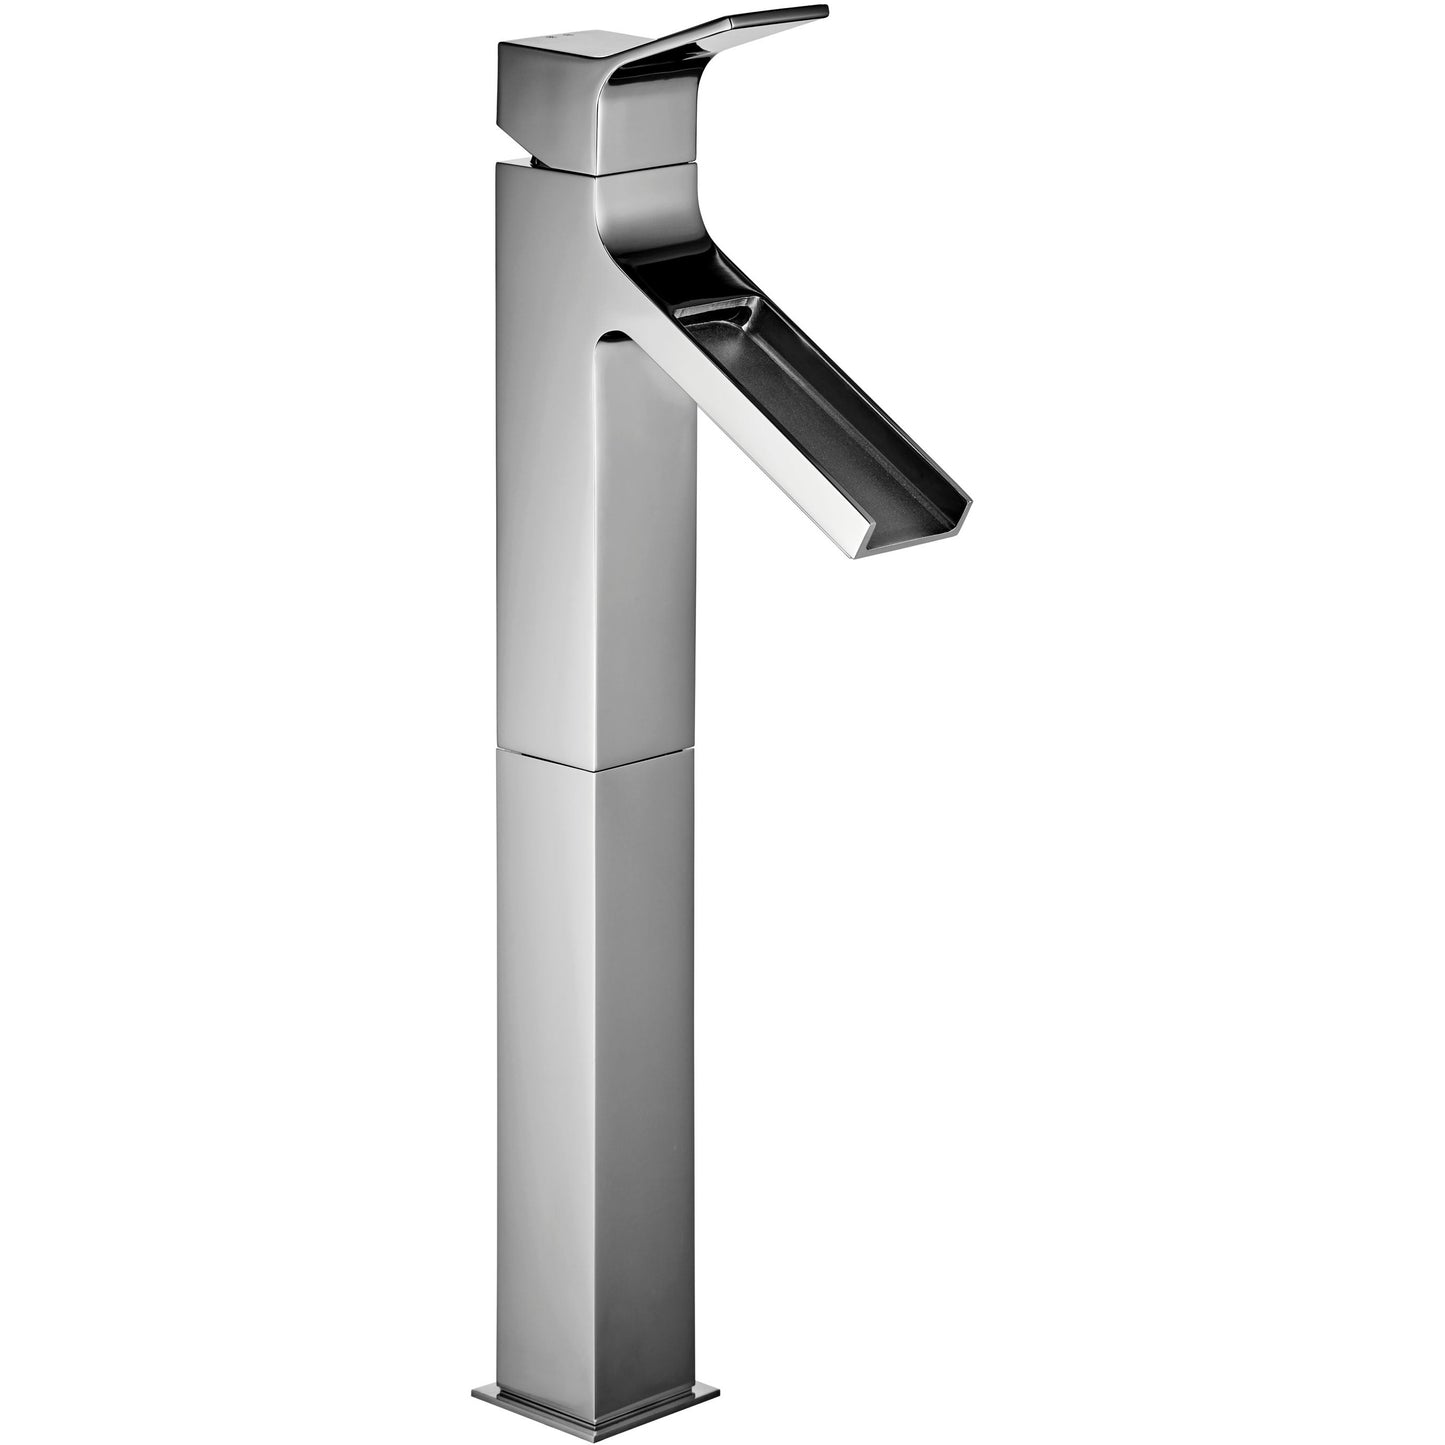 Lavabo faucet Young tall single lever 073159